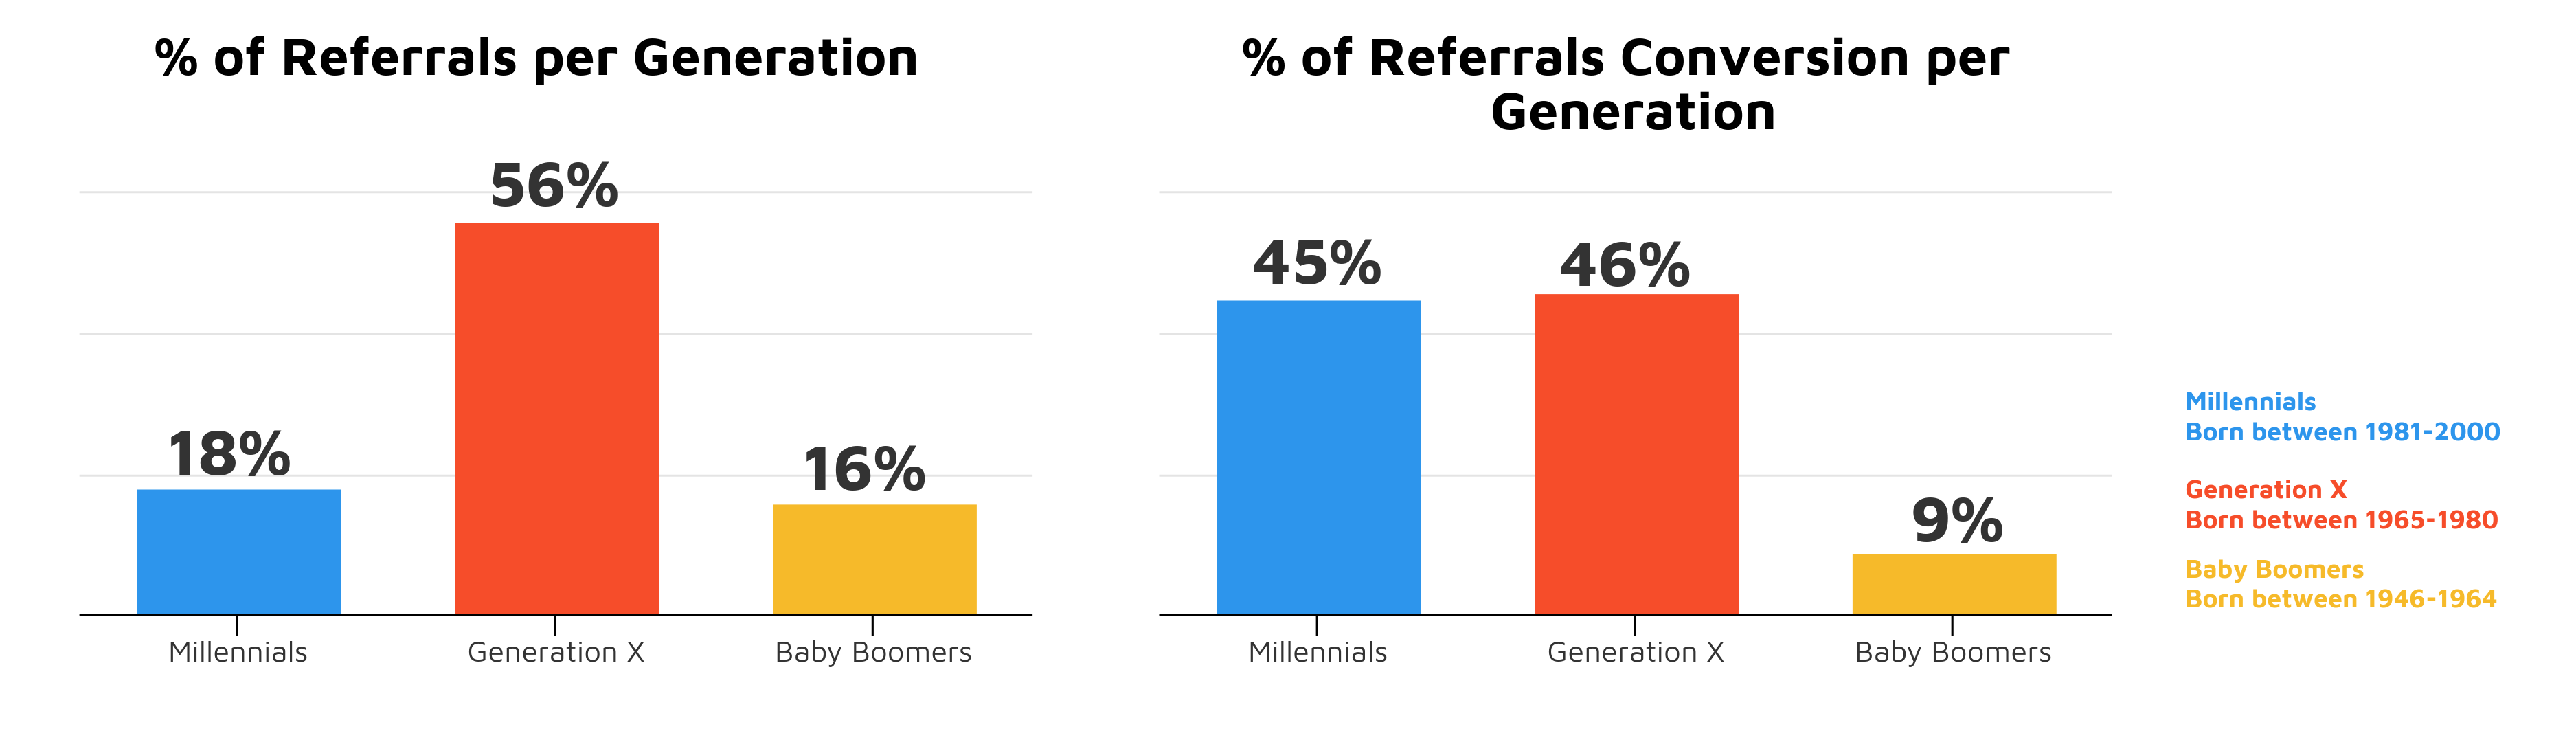 Referrals and Generations